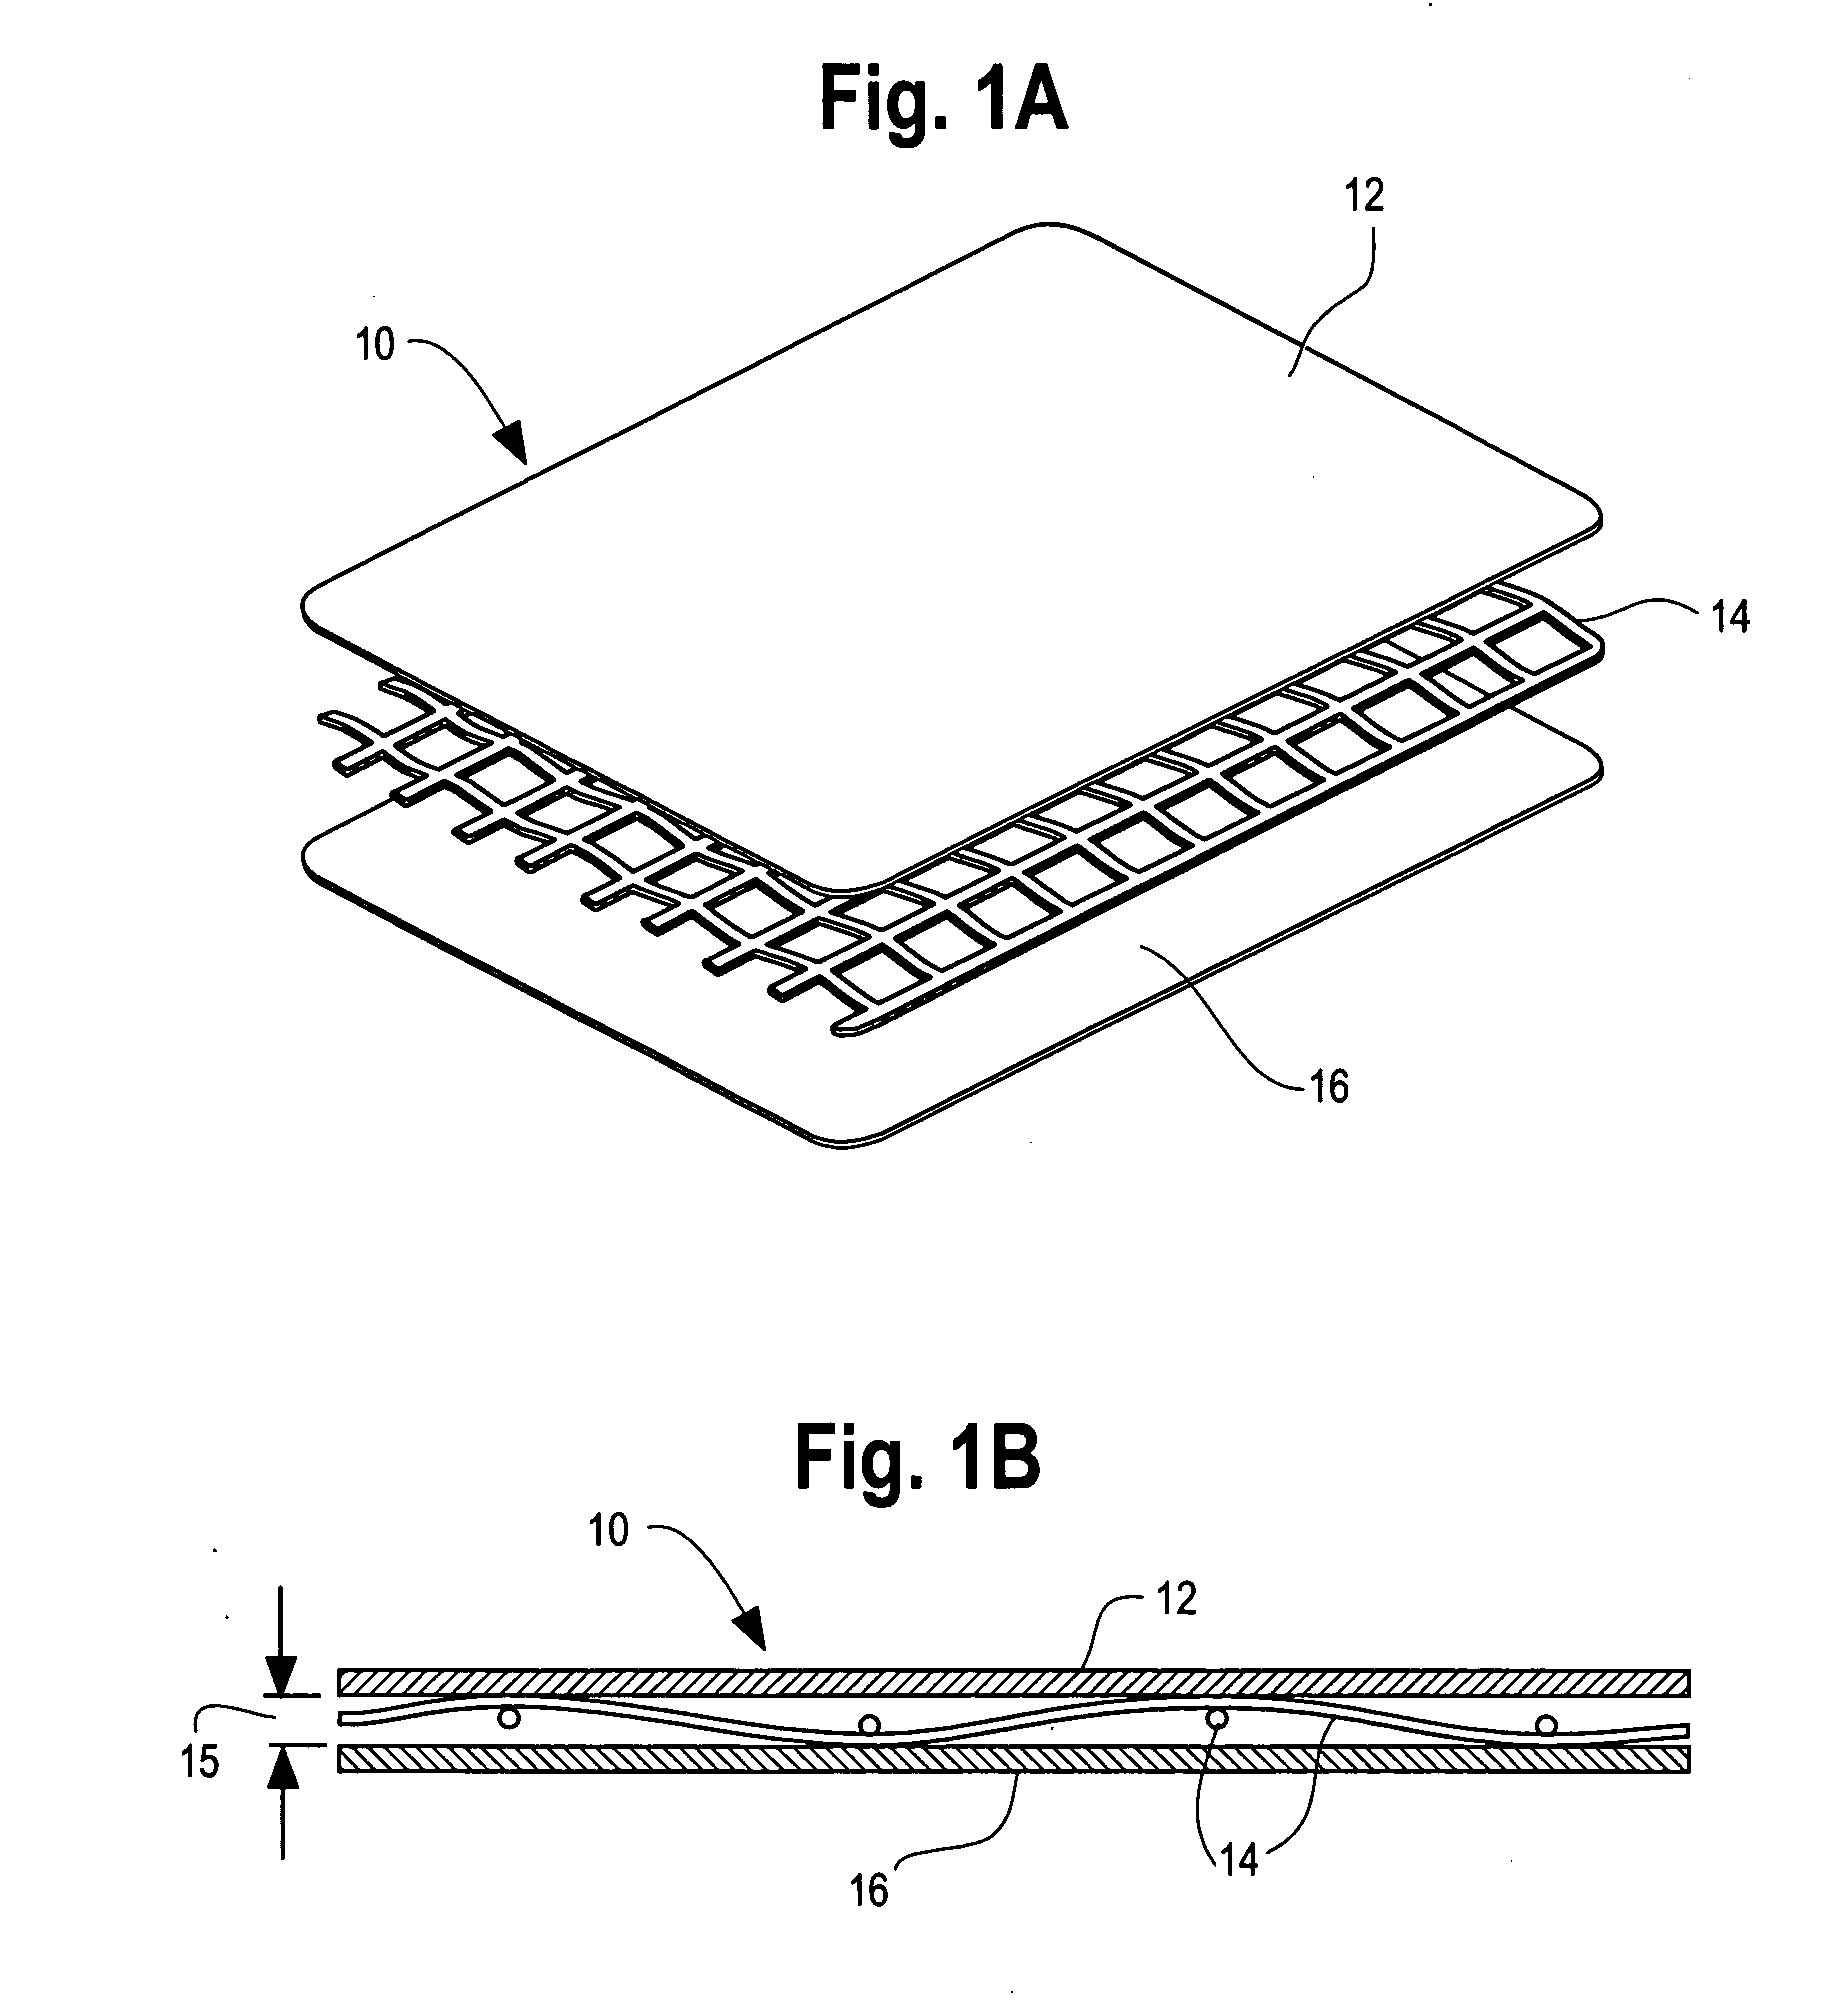 Fuel cartridge with a flexible bladder for storing and delivering a vaporizable liquid fuel stream to a fuel cell system